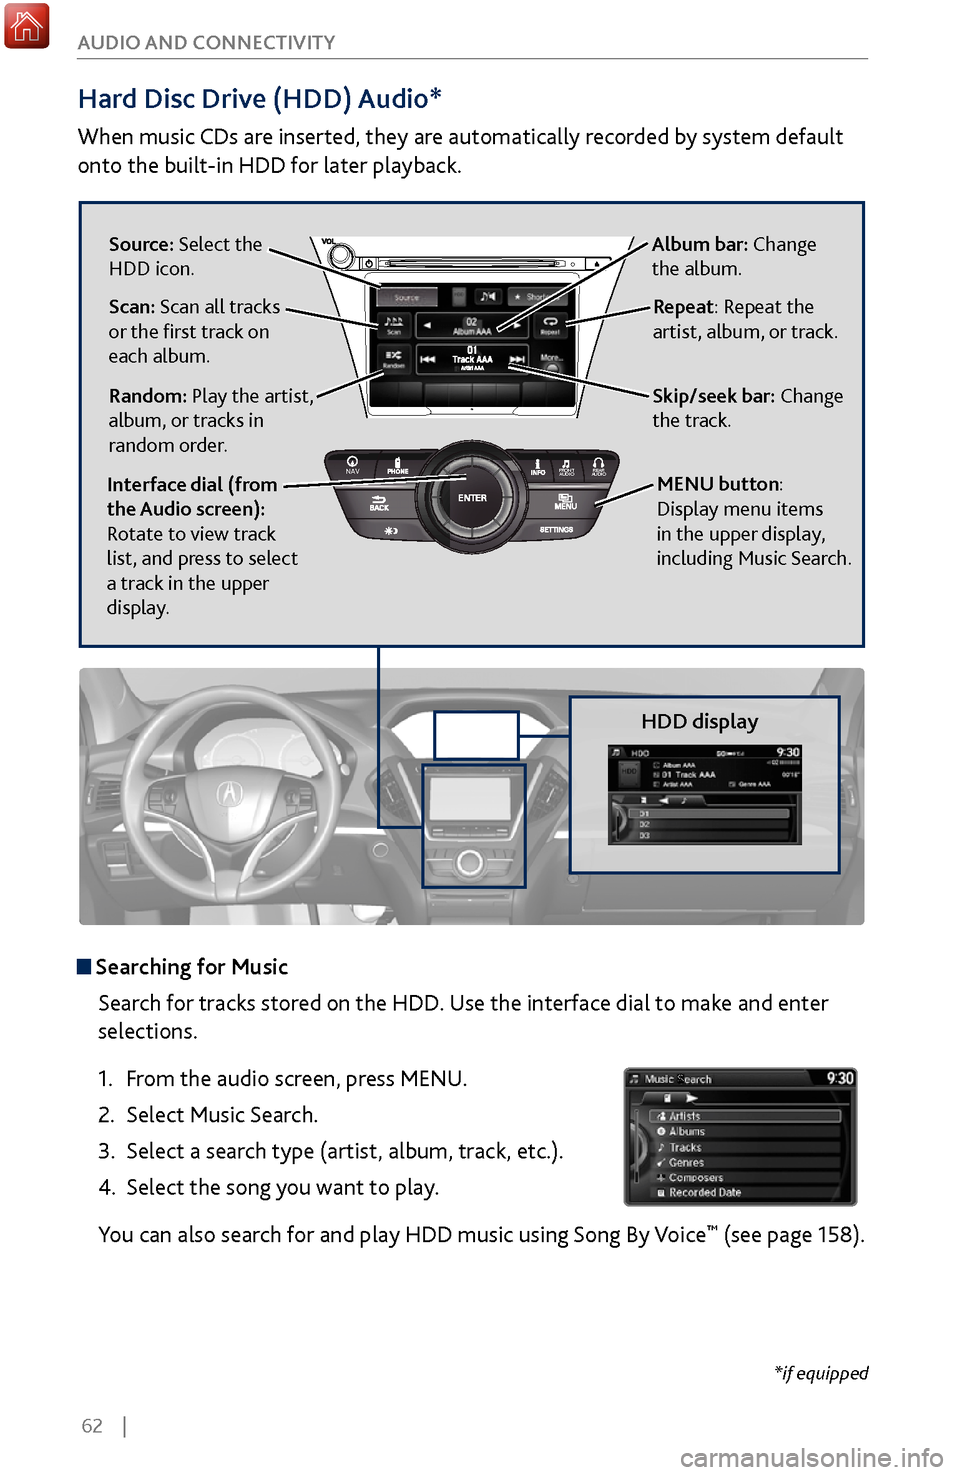 Acura MDX 2017 User Guide 62    |
AUDIO AND CONNECTIVITY
Hard Disc Drive (HDD) Audio*
When music CDs are inserted, they are automatically recorded by system default 
onto the built-in HDD for later playback. 
HDD display
 Sear